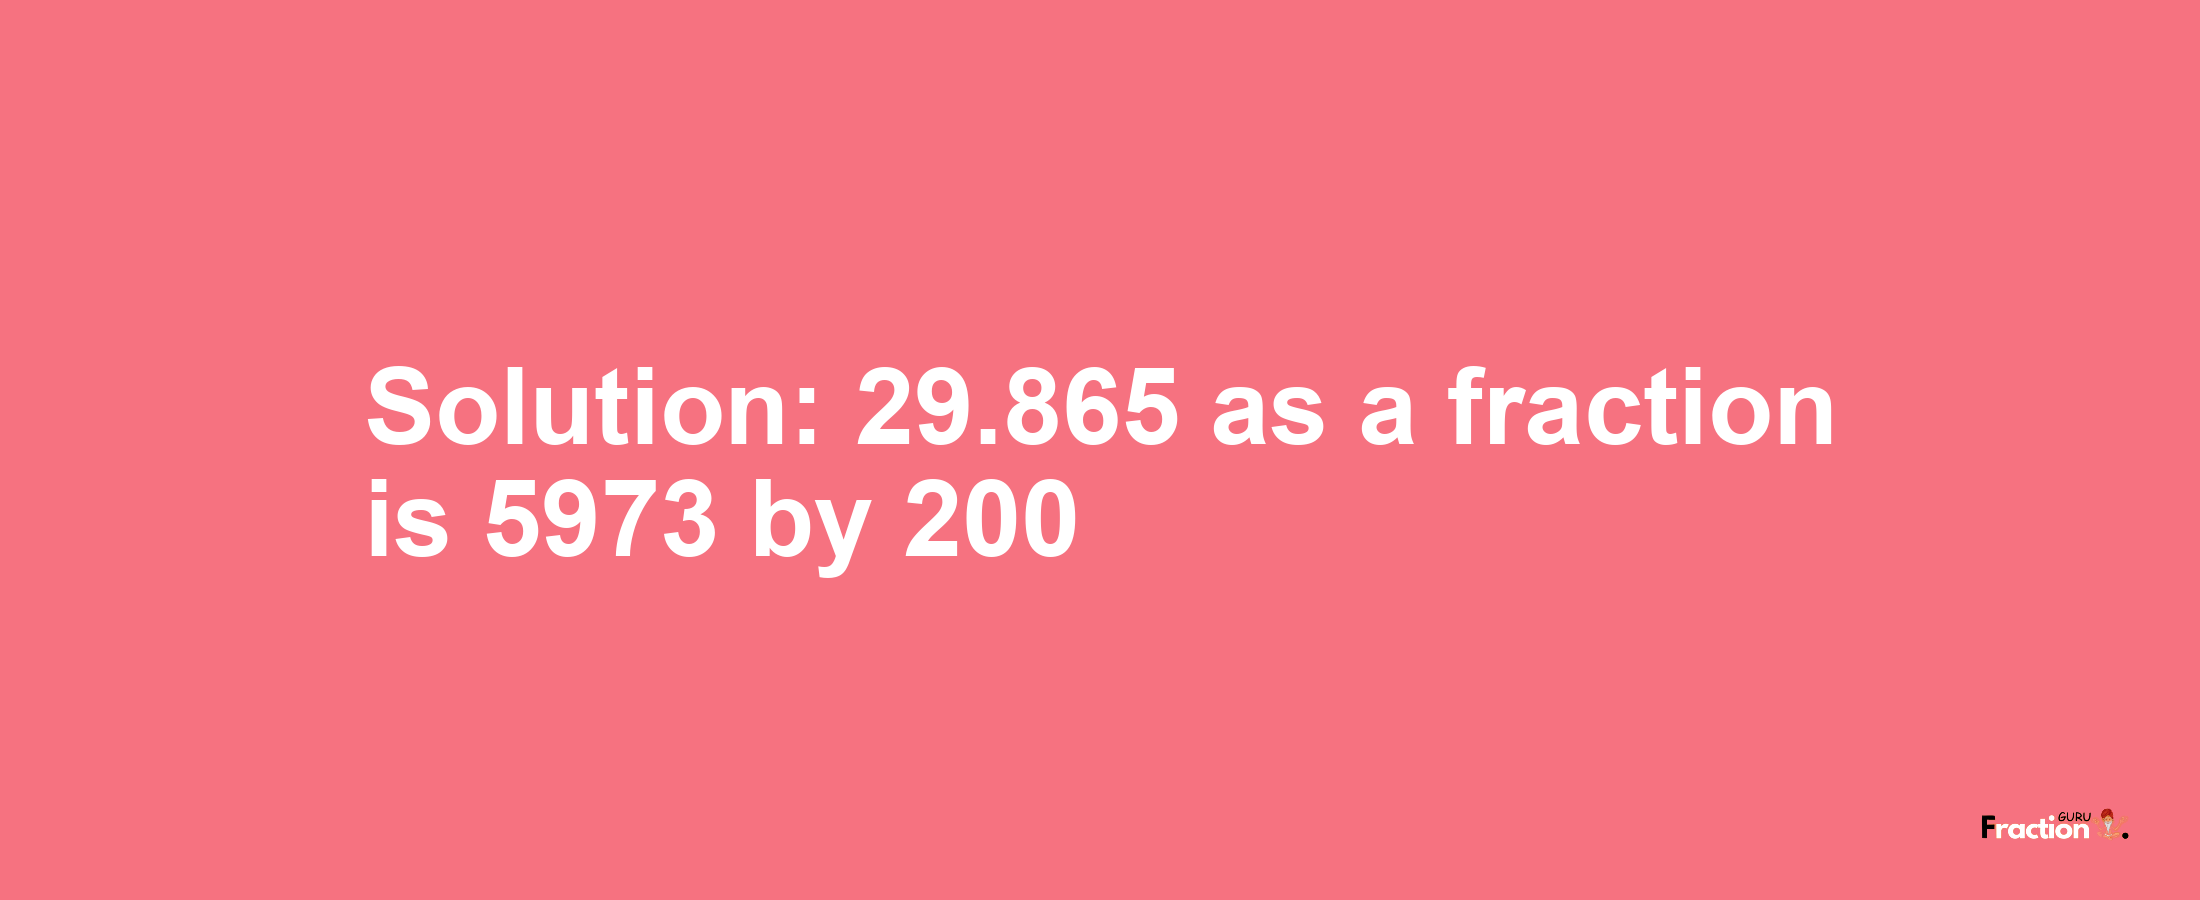 Solution:29.865 as a fraction is 5973/200